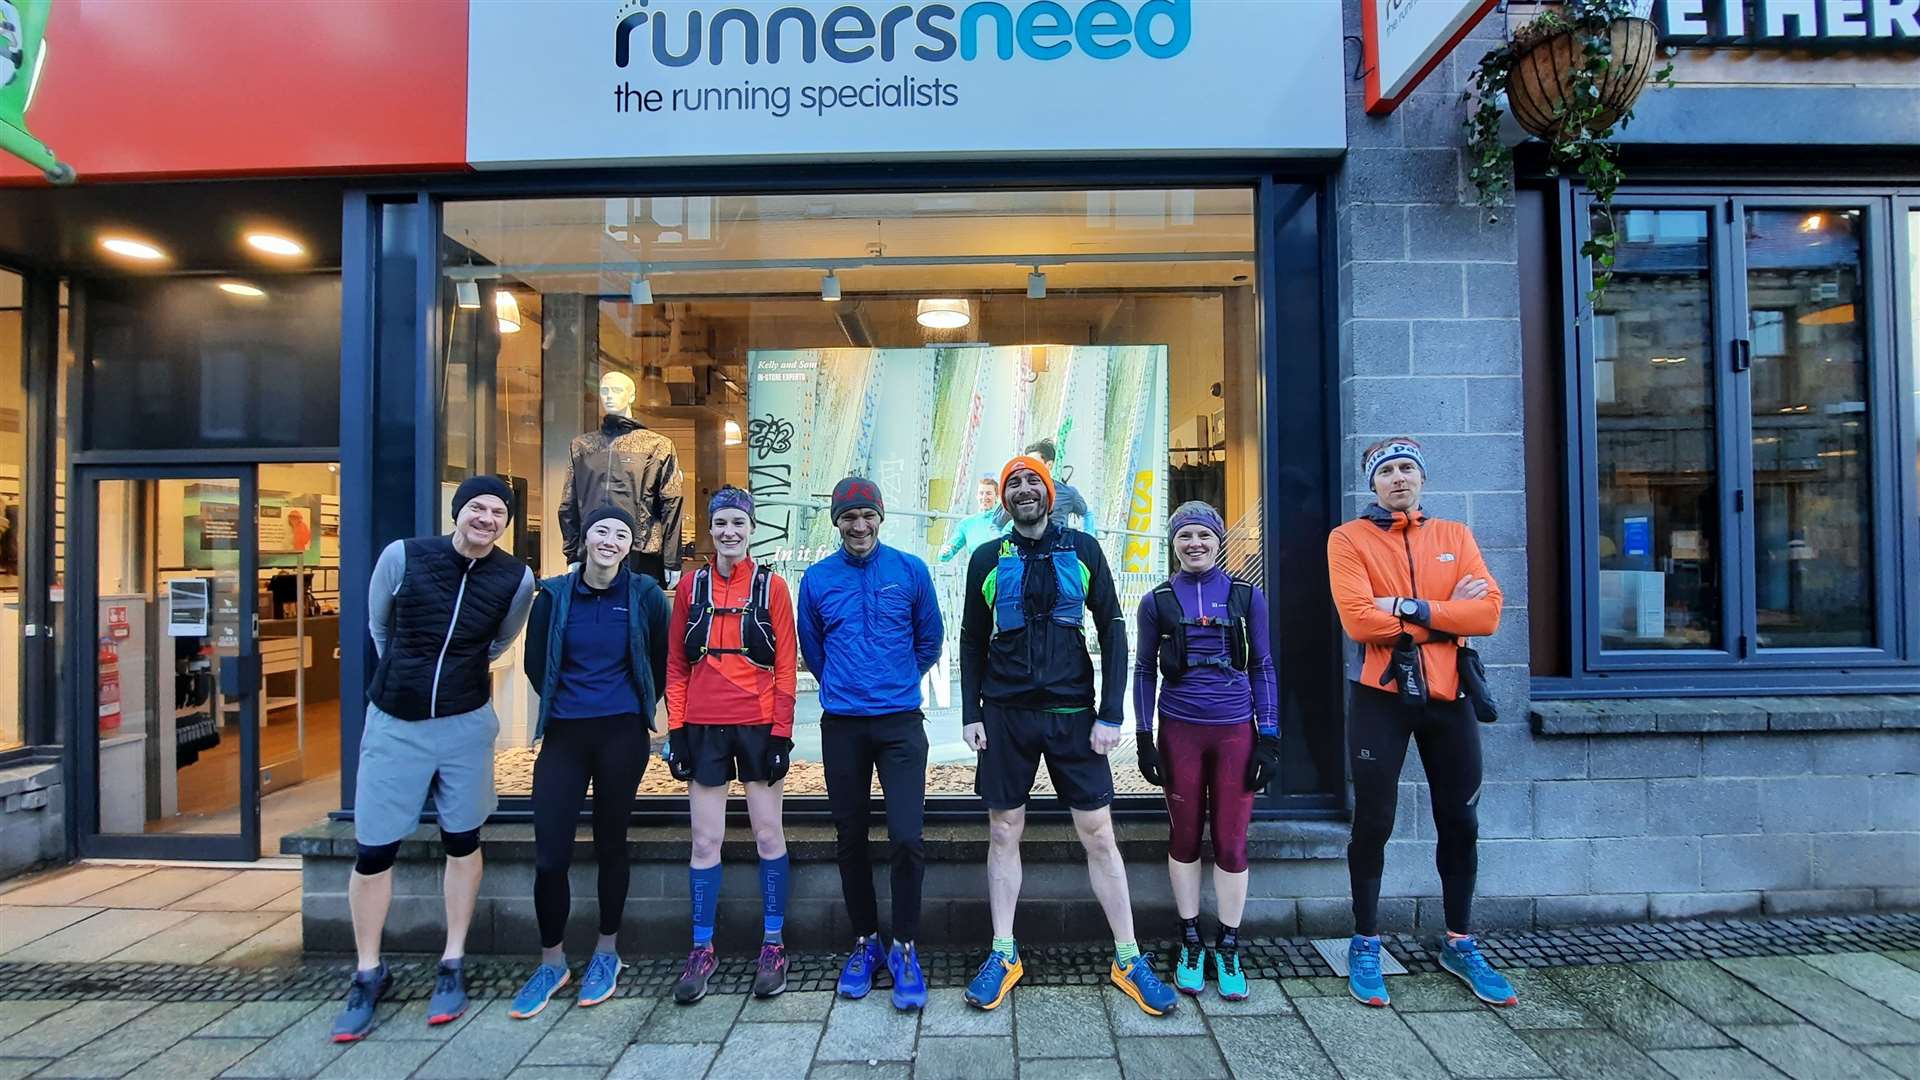 Runners Paul, Amy, Lisa, George, John, Louise and Jon are raring to go outside the Runners Need shop in Fort William.